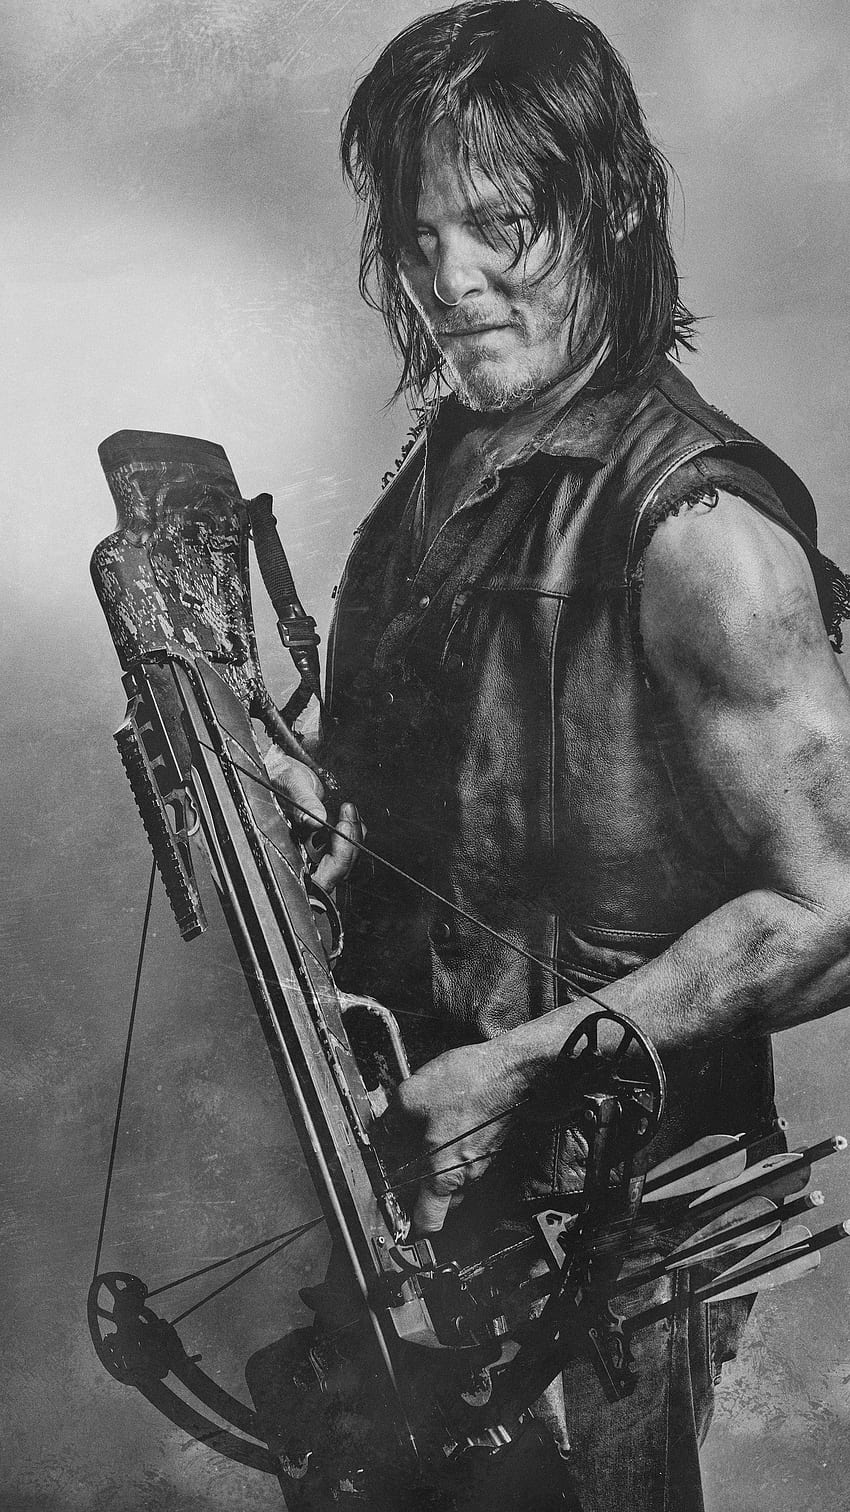 Mobile wallpaper Tv Show Norman Reedus The Walking Dead Daryl Dixon  1331130 download the picture for free